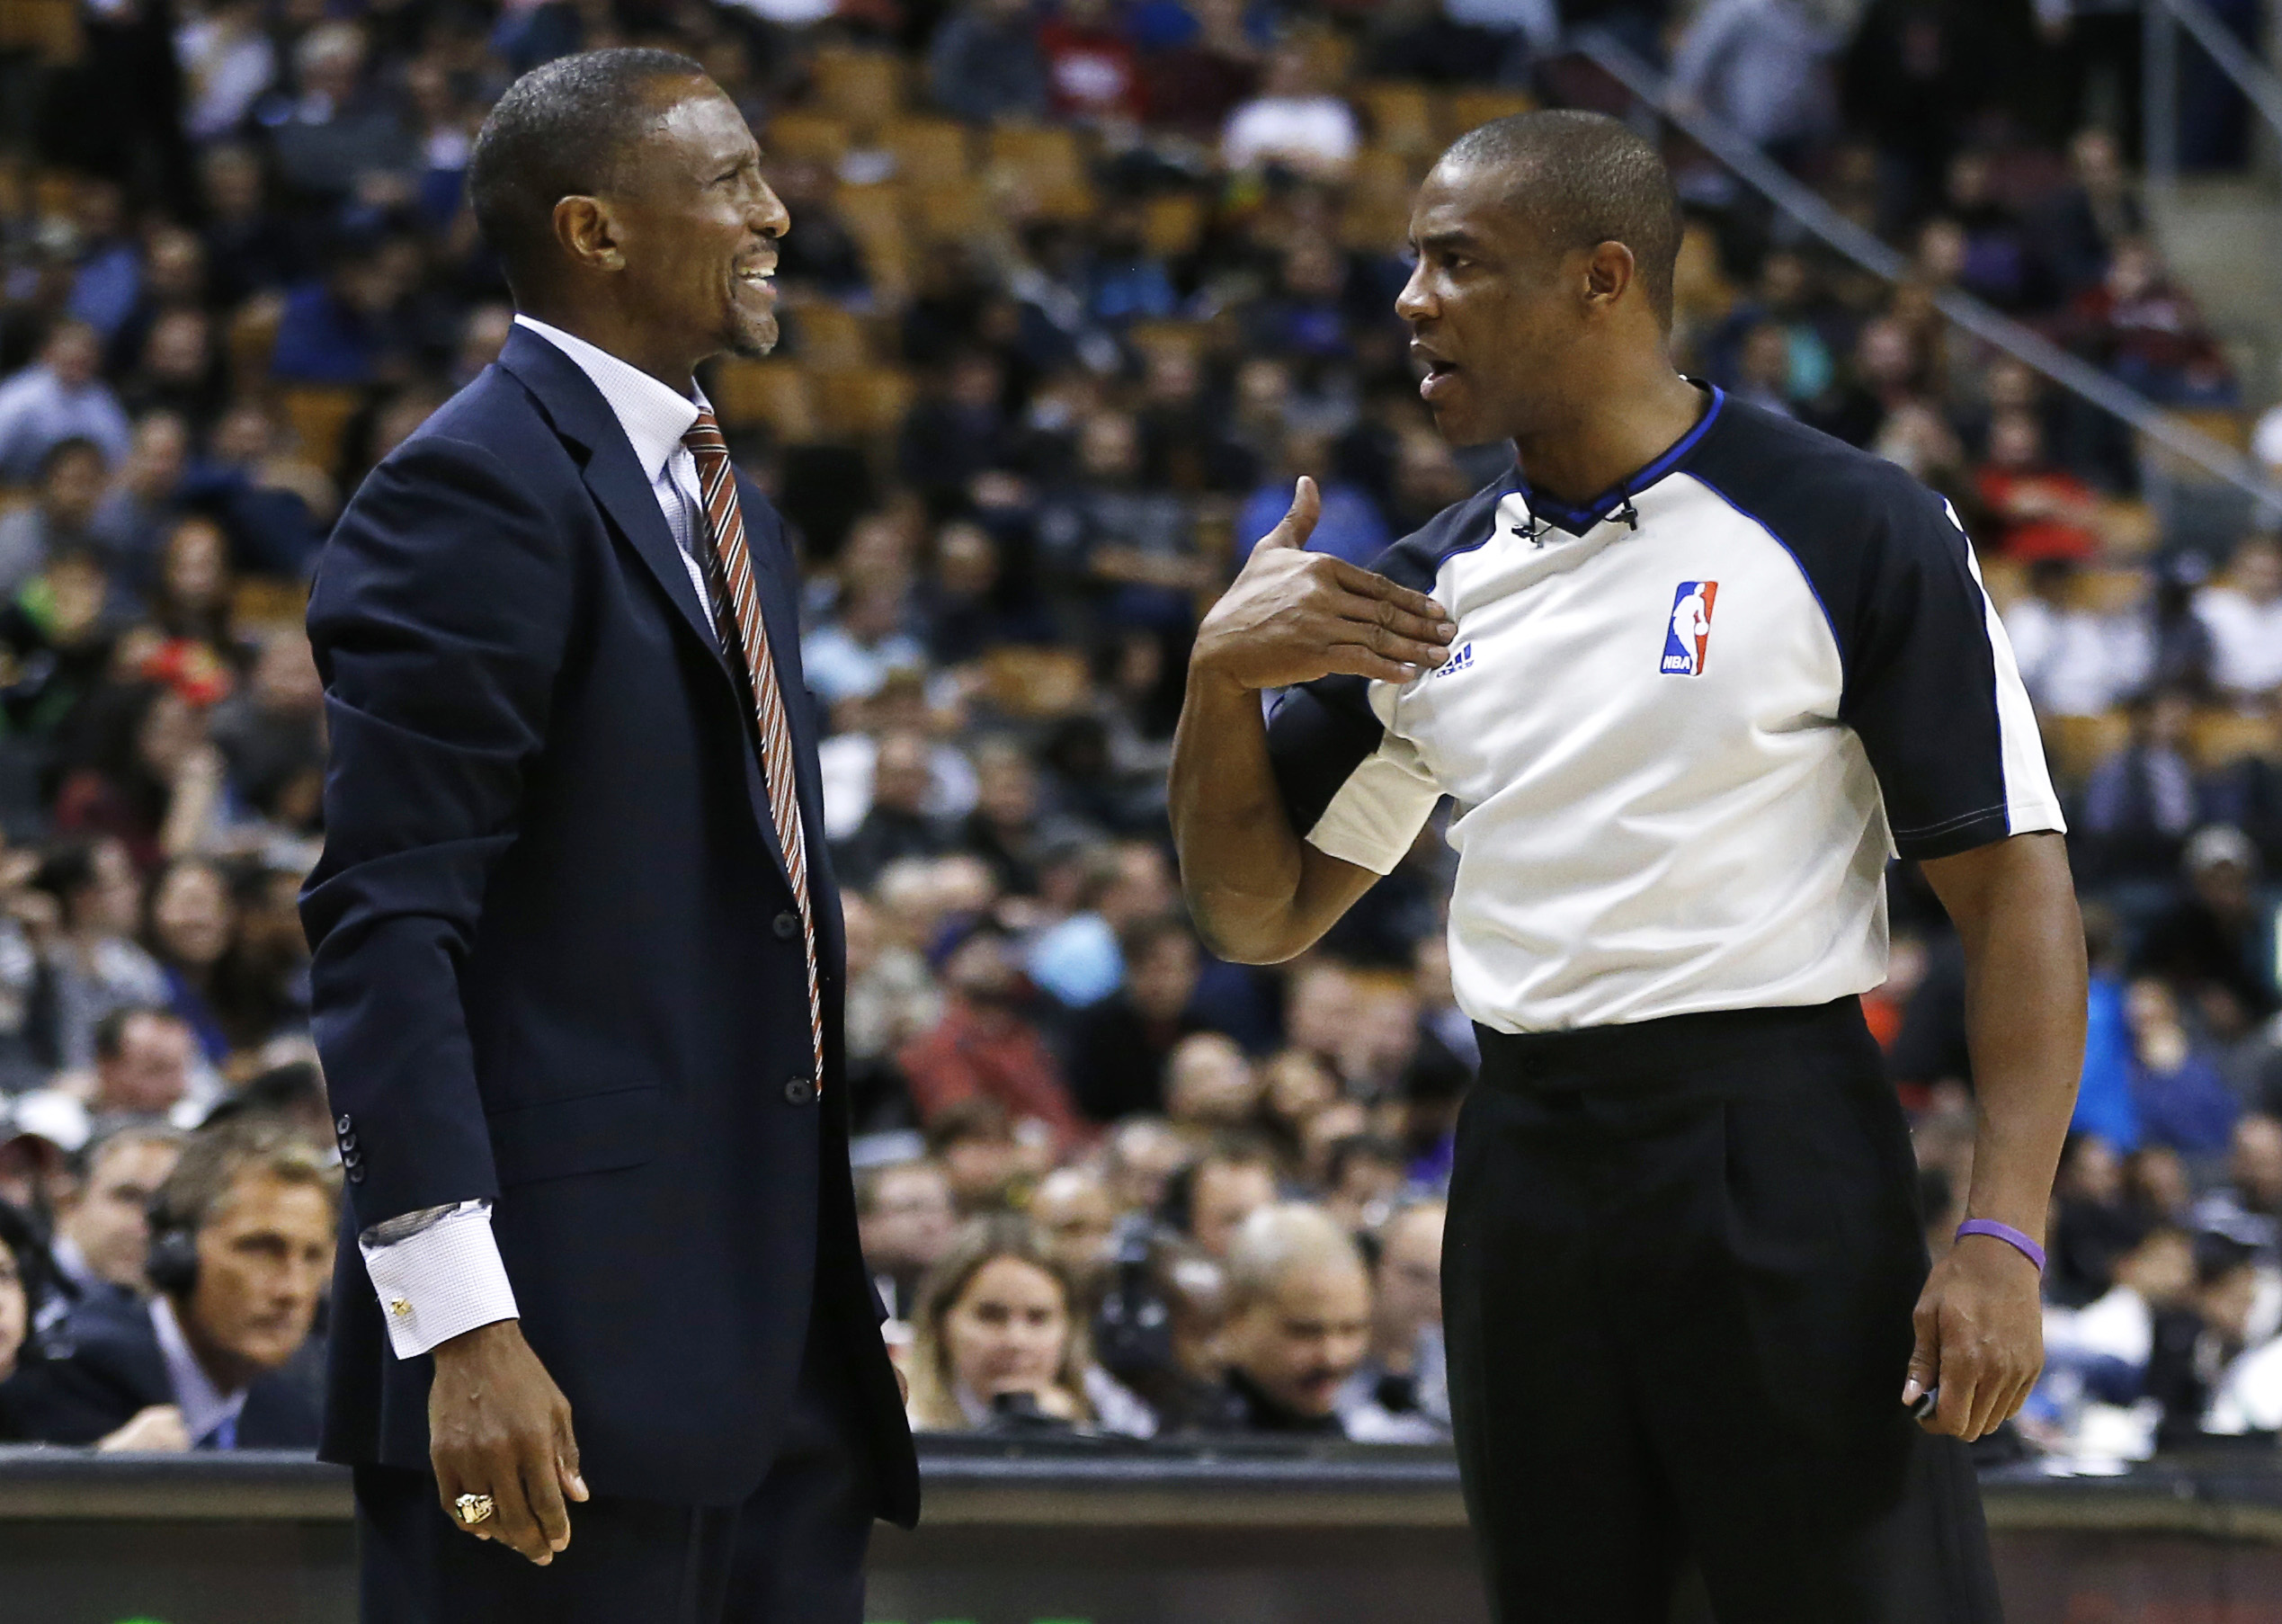 Longtime NBA referee Tony Brown dies at 55 after battle with cancer